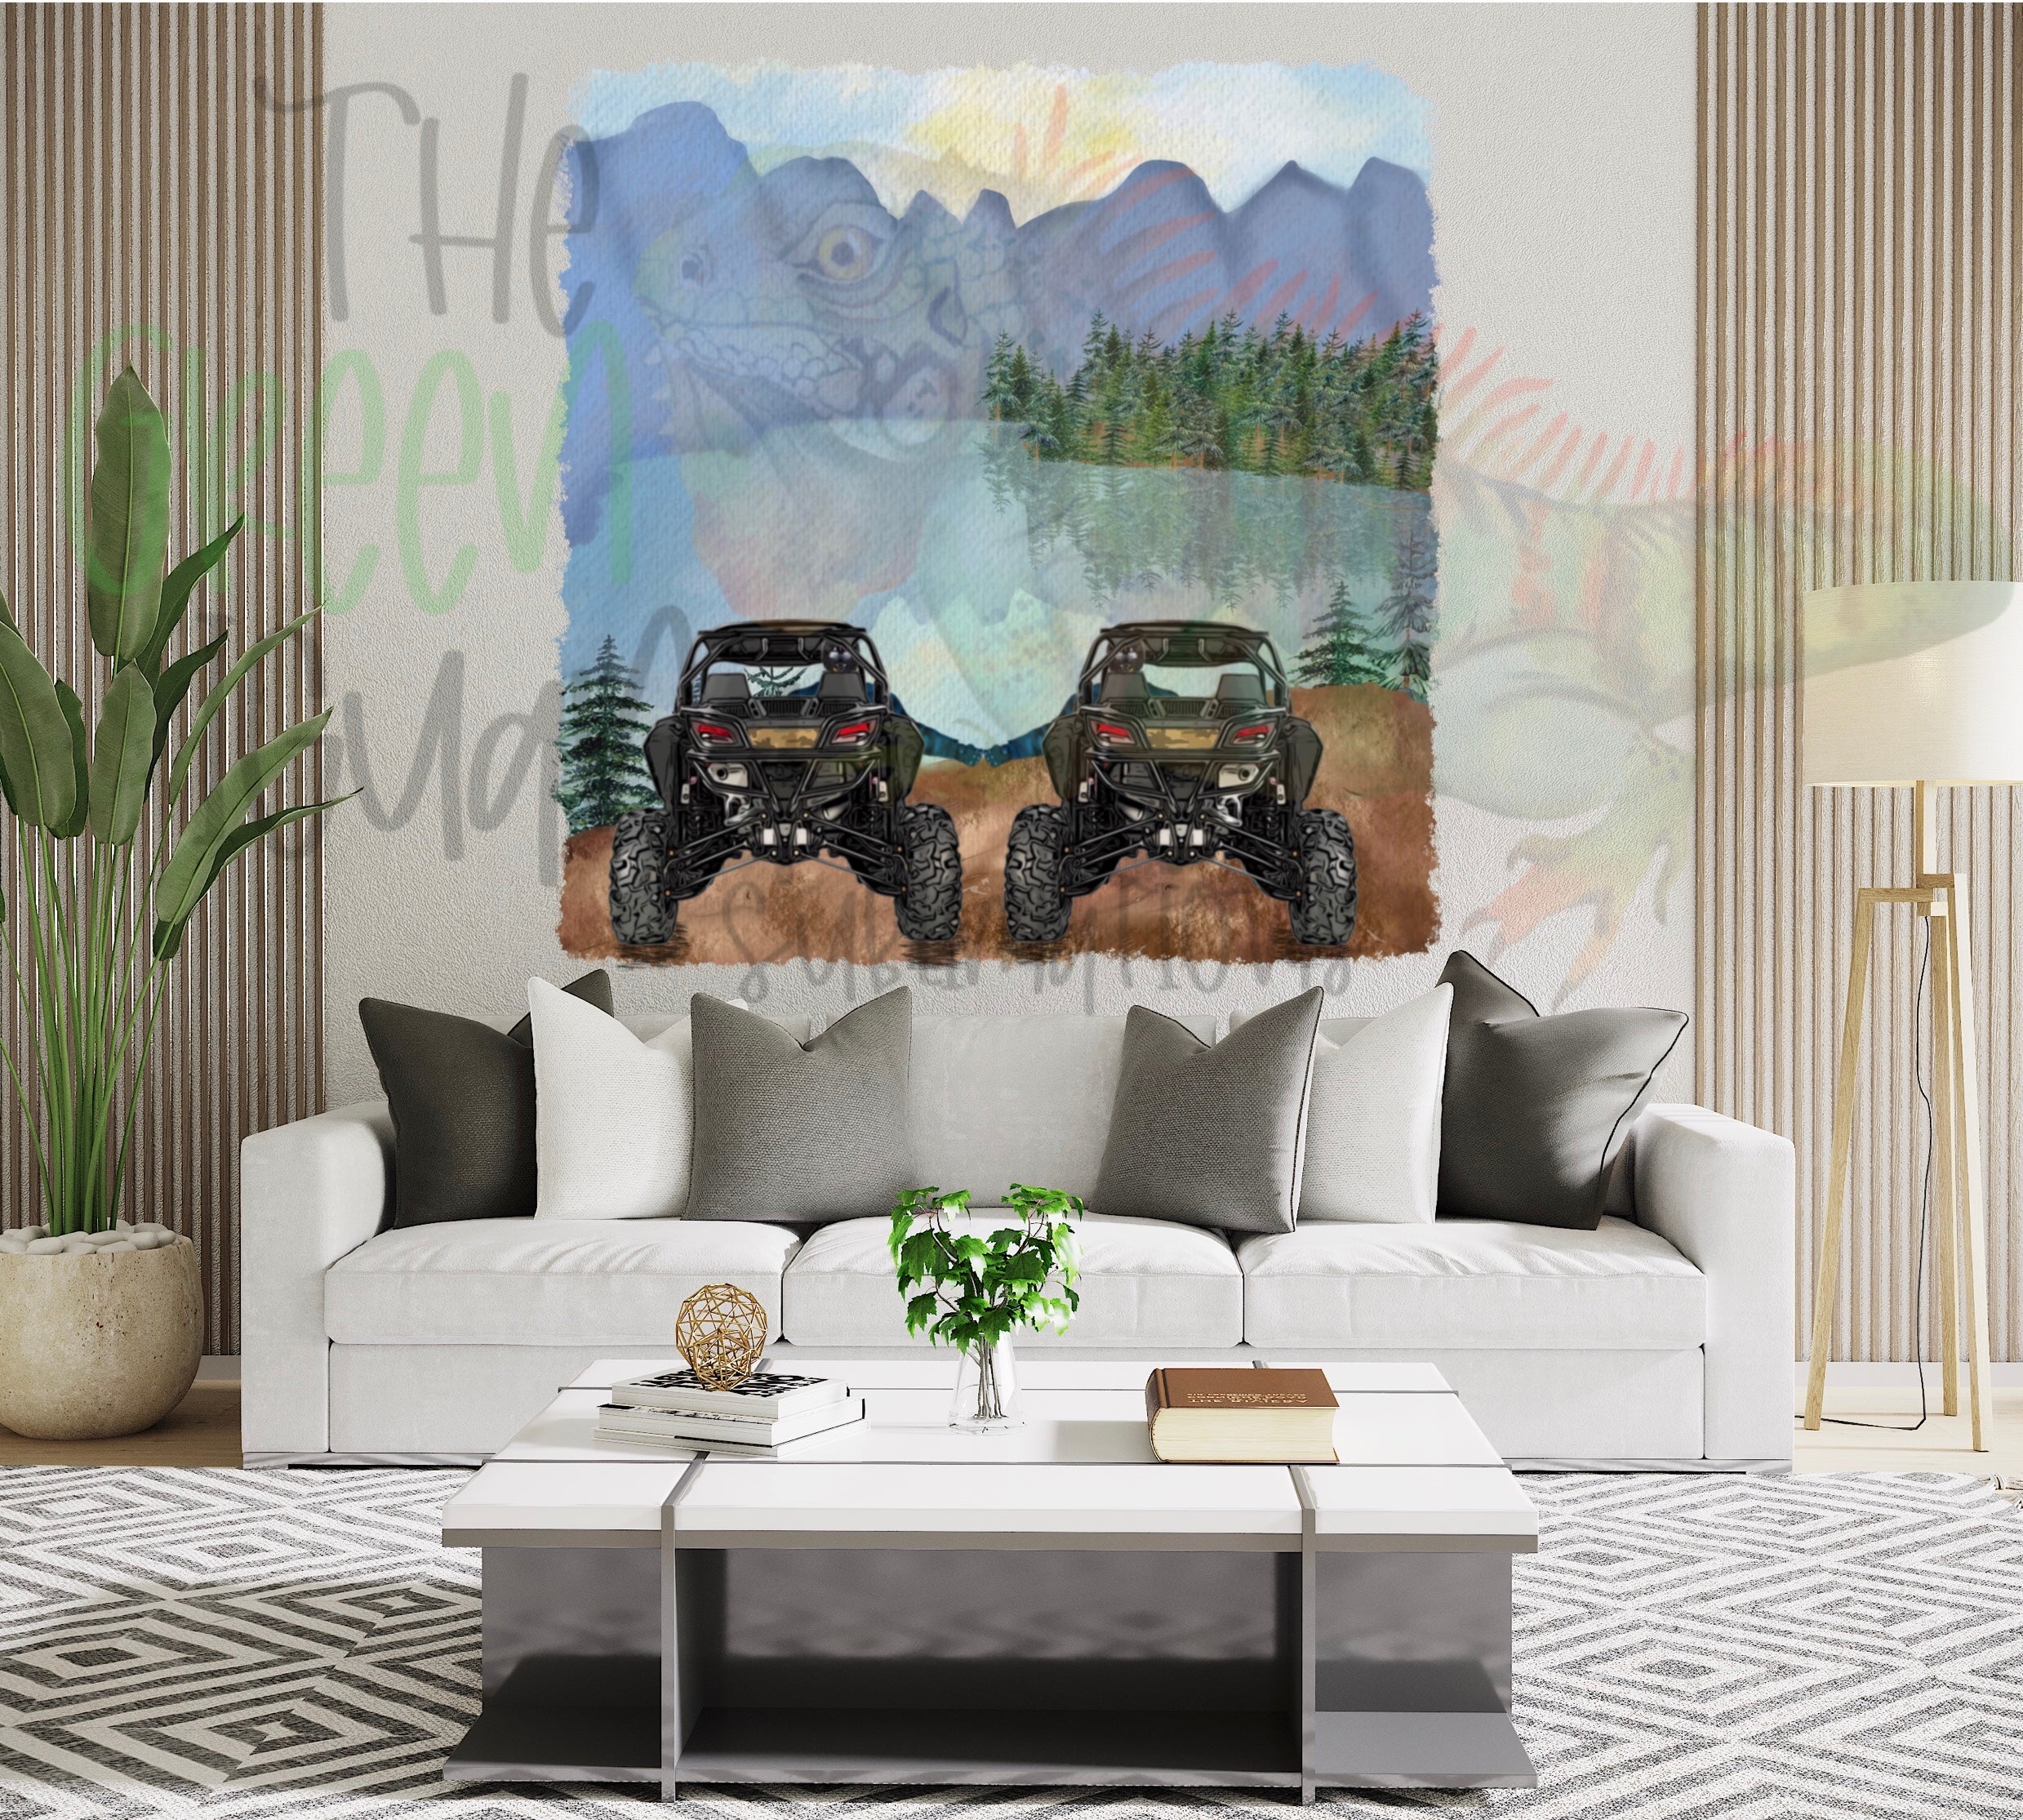 Side by side friends/couple (camo) with mountain scenery